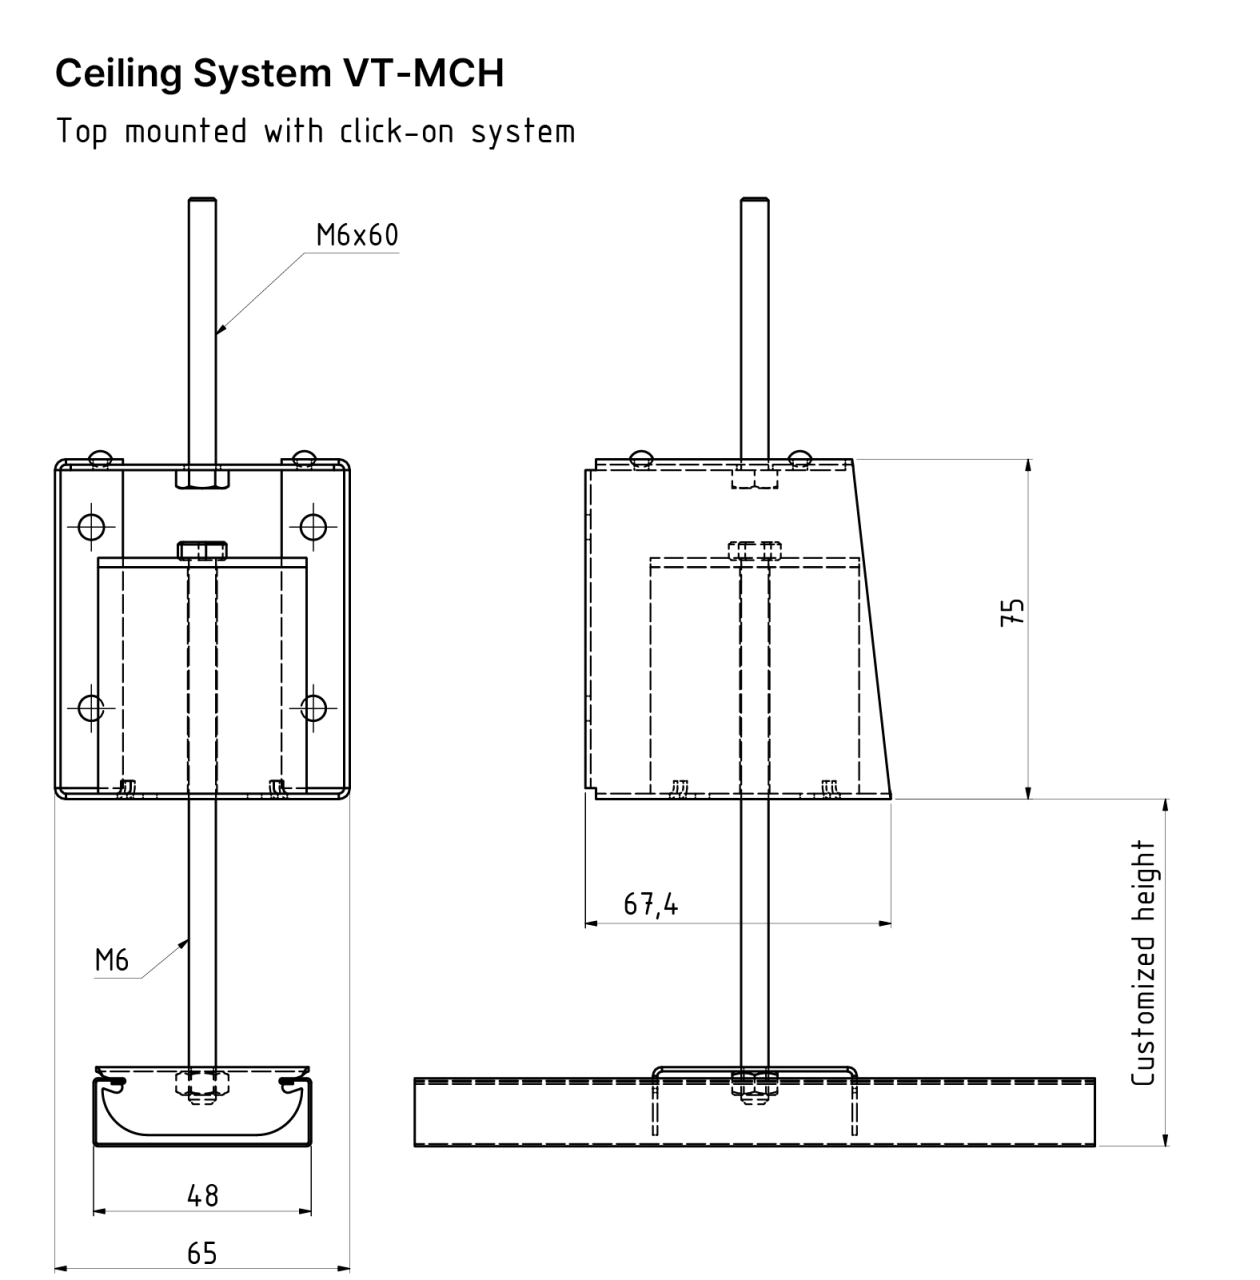 Technical drawing of the suspended Ceiling System VT-MCH from Vibratec